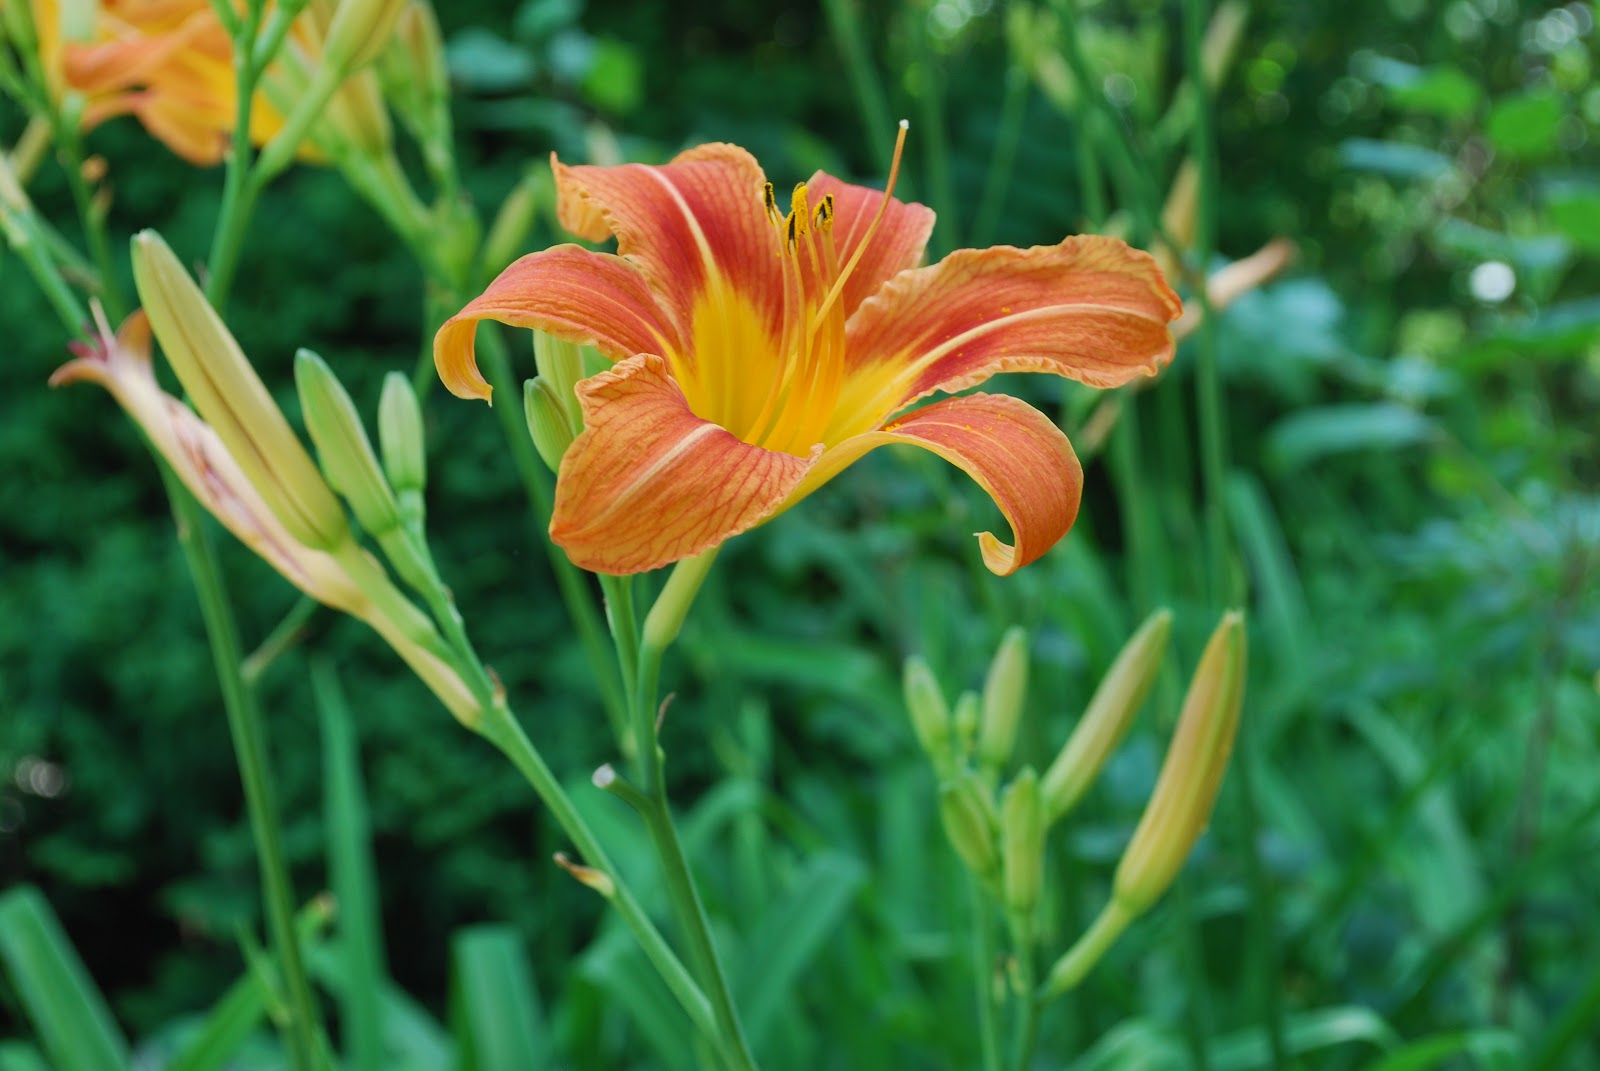 Reflective Thoughts by Barbara: TIGER LILLIES FROM THE SIDE OF THE ROAD